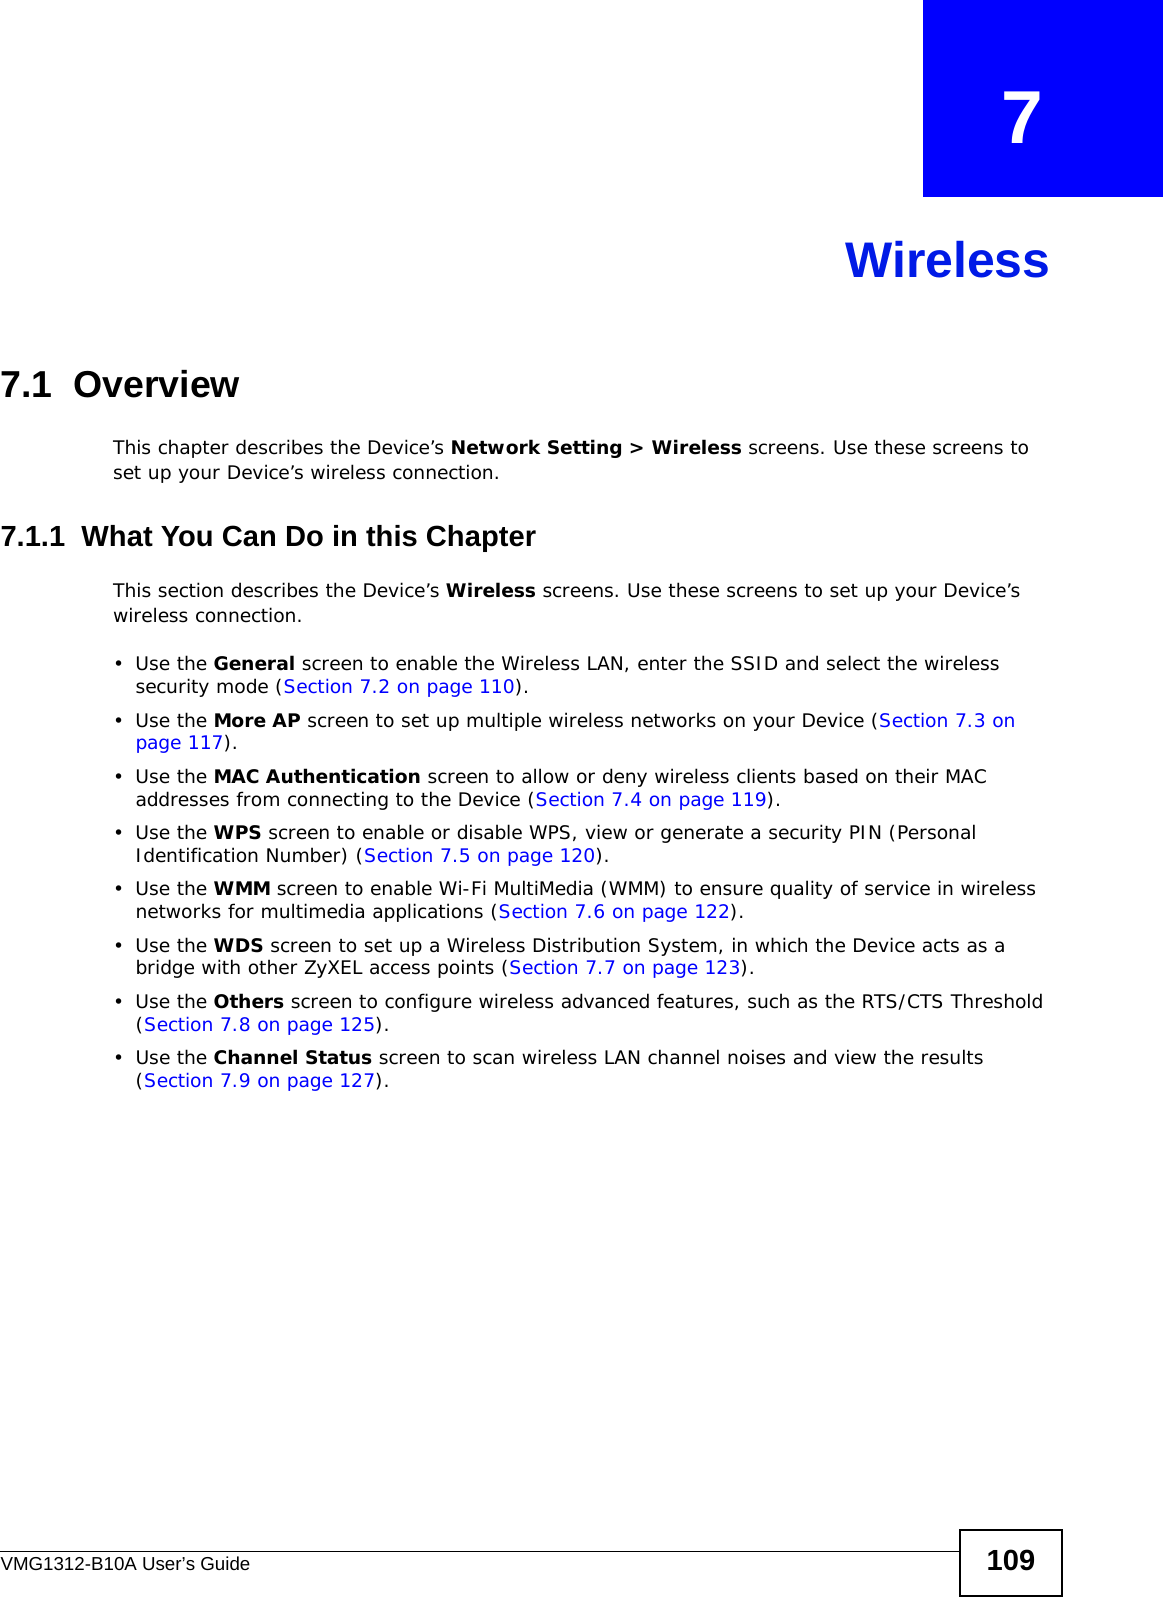 VMG1312-B10A User’s Guide 109CHAPTER   7Wireless7.1  Overview This chapter describes the Device’s Network Setting &gt; Wireless screens. Use these screens to set up your Device’s wireless connection.7.1.1  What You Can Do in this ChapterThis section describes the Device’s Wireless screens. Use these screens to set up your Device’s wireless connection.•Use the General screen to enable the Wireless LAN, enter the SSID and select the wireless security mode (Section 7.2 on page 110).•Use the More AP screen to set up multiple wireless networks on your Device (Section 7.3 on page 117).•Use the MAC Authentication screen to allow or deny wireless clients based on their MAC addresses from connecting to the Device (Section 7.4 on page 119).•Use the WPS screen to enable or disable WPS, view or generate a security PIN (Personal Identification Number) (Section 7.5 on page 120).•Use the WMM screen to enable Wi-Fi MultiMedia (WMM) to ensure quality of service in wireless networks for multimedia applications (Section 7.6 on page 122). •Use the WDS screen to set up a Wireless Distribution System, in which the Device acts as a bridge with other ZyXEL access points (Section 7.7 on page 123).•Use the Others screen to configure wireless advanced features, such as the RTS/CTS Threshold (Section 7.8 on page 125).•Use the Channel Status screen to scan wireless LAN channel noises and view the results (Section 7.9 on page 127).